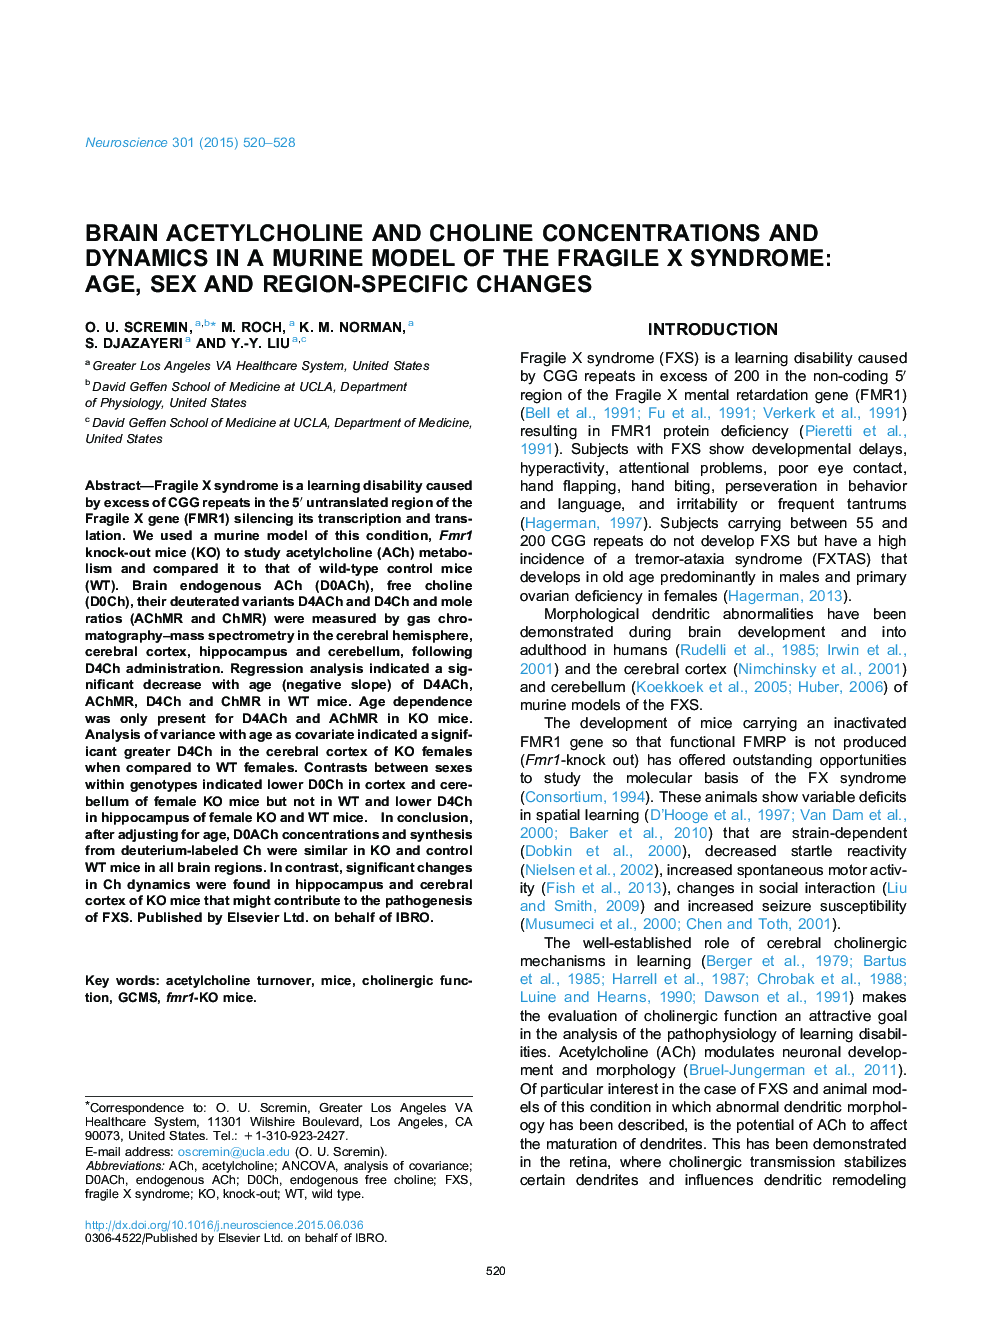 Brain acetylcholine and choline concentrations and dynamics in a murine model of the Fragile X syndrome: Age, sex and region-specific changes